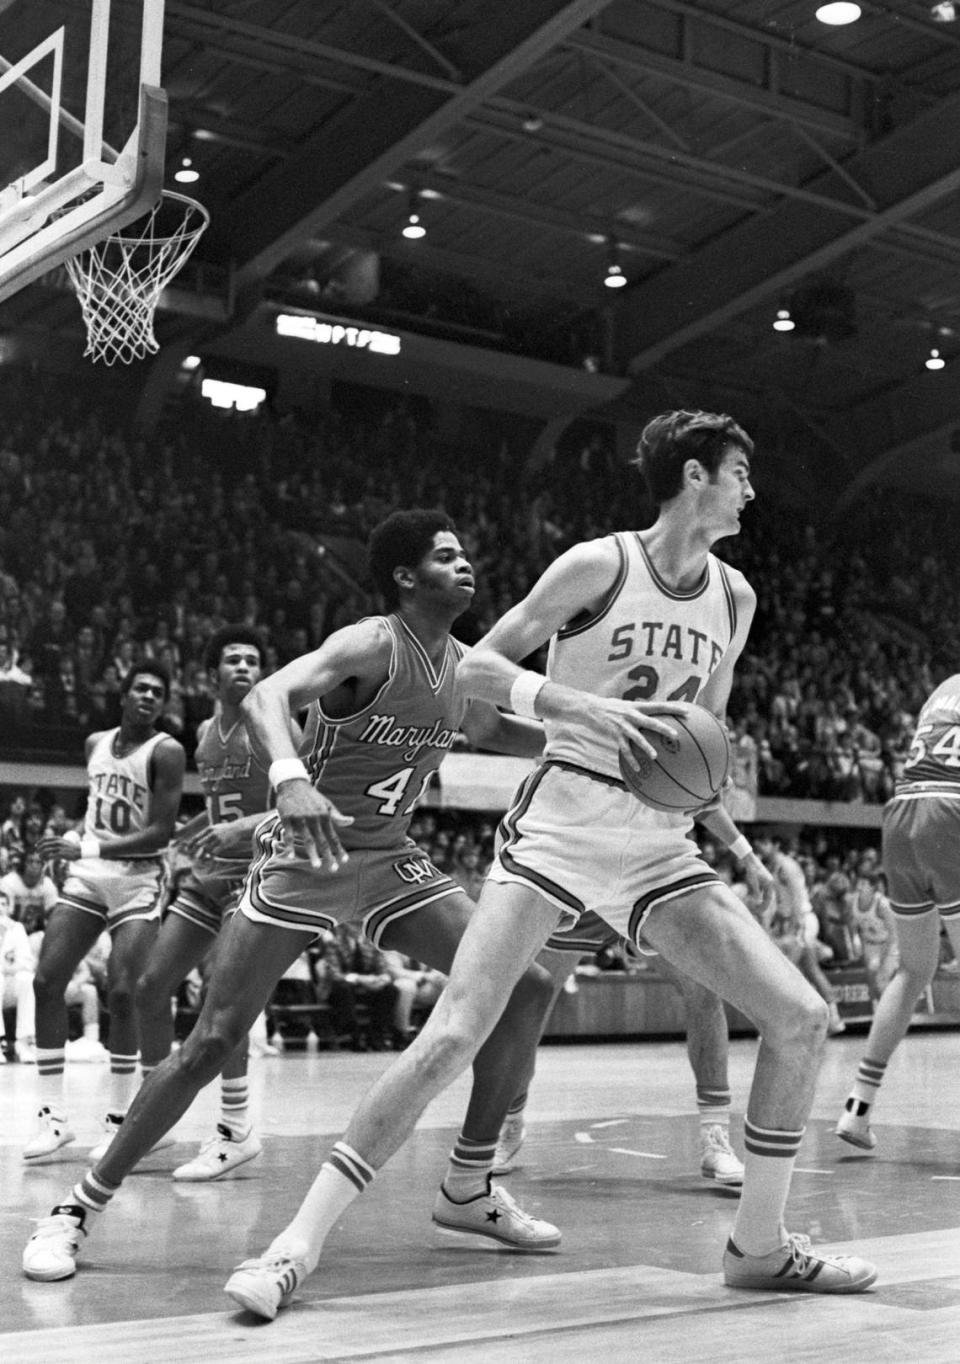 NC State’s Tommy Burleson moves against Maryland’s Len Elmore in 1974 action in Reynolds Coliseum.